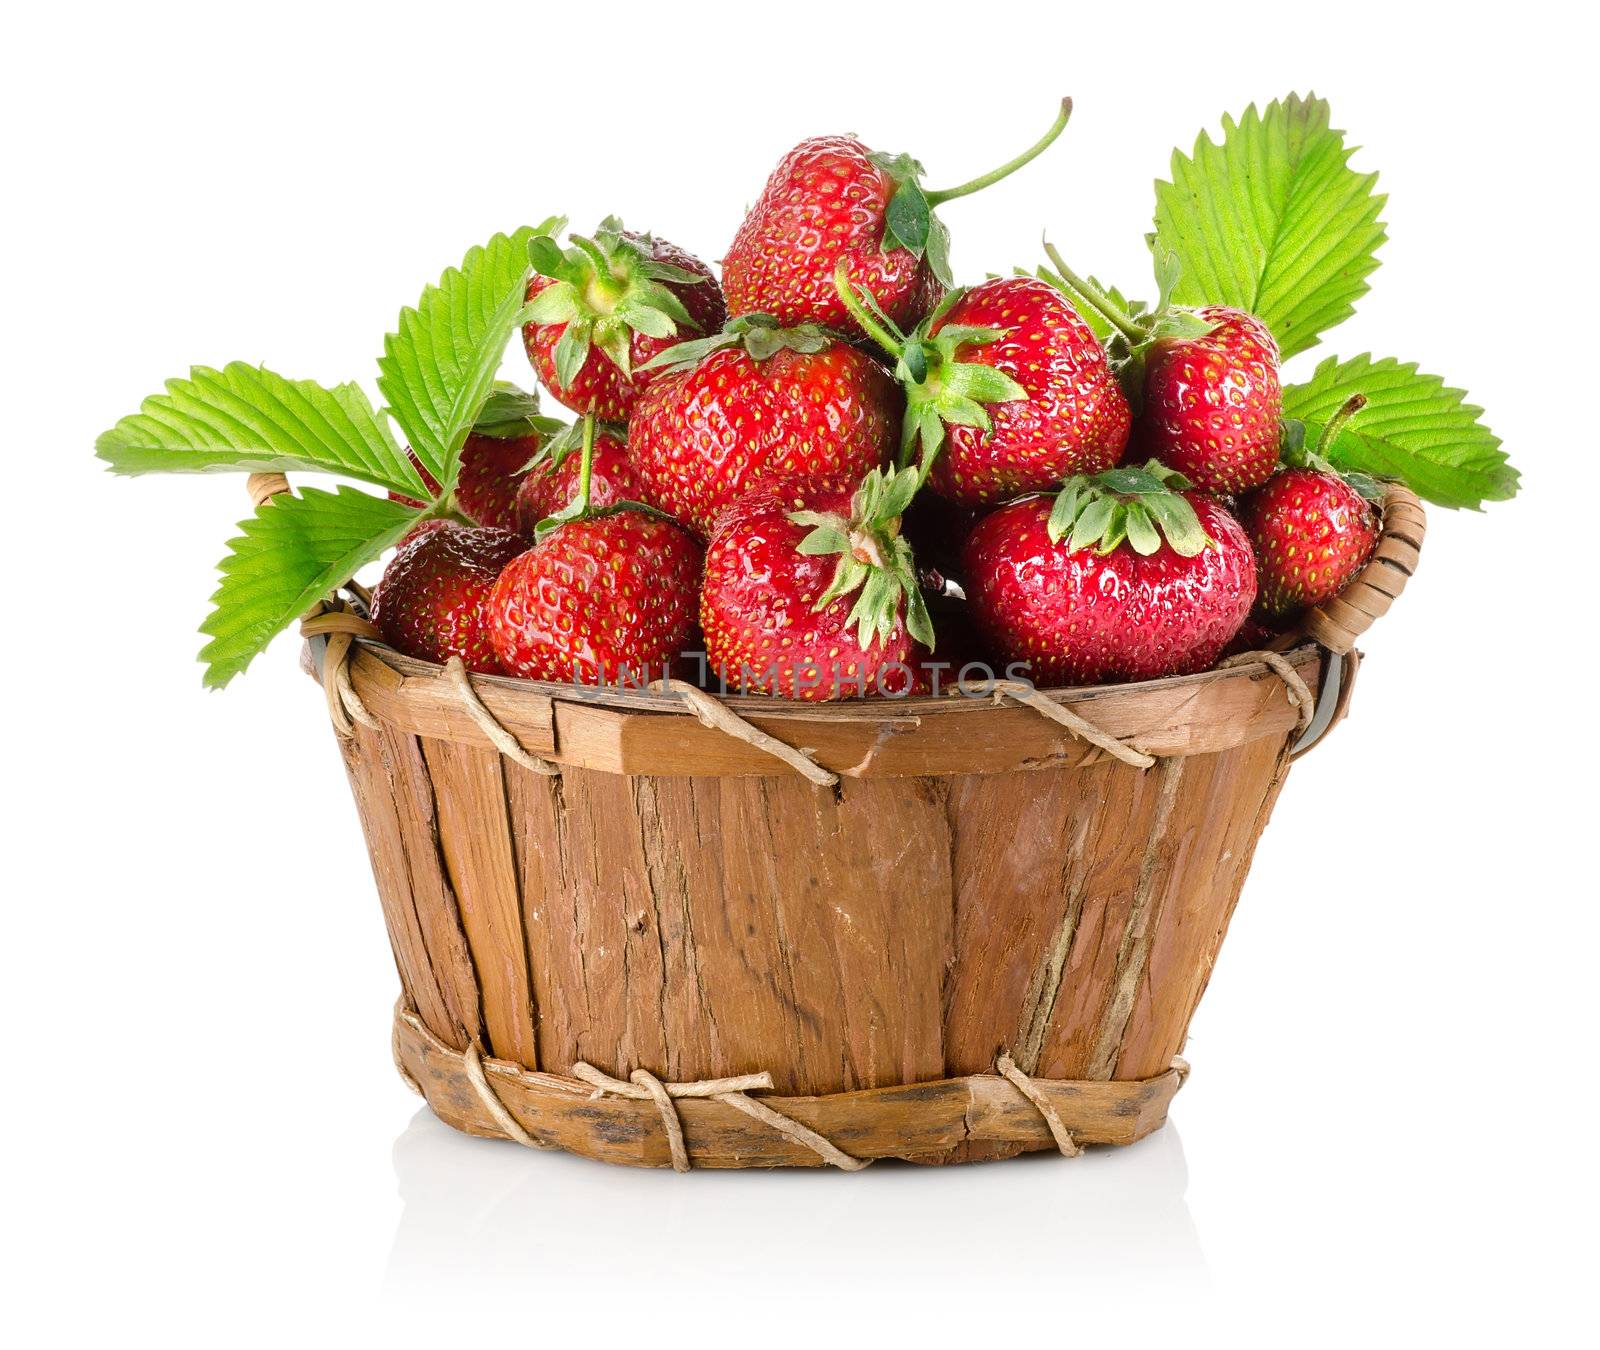 Strawberries in a wooden basket isolated on a white background